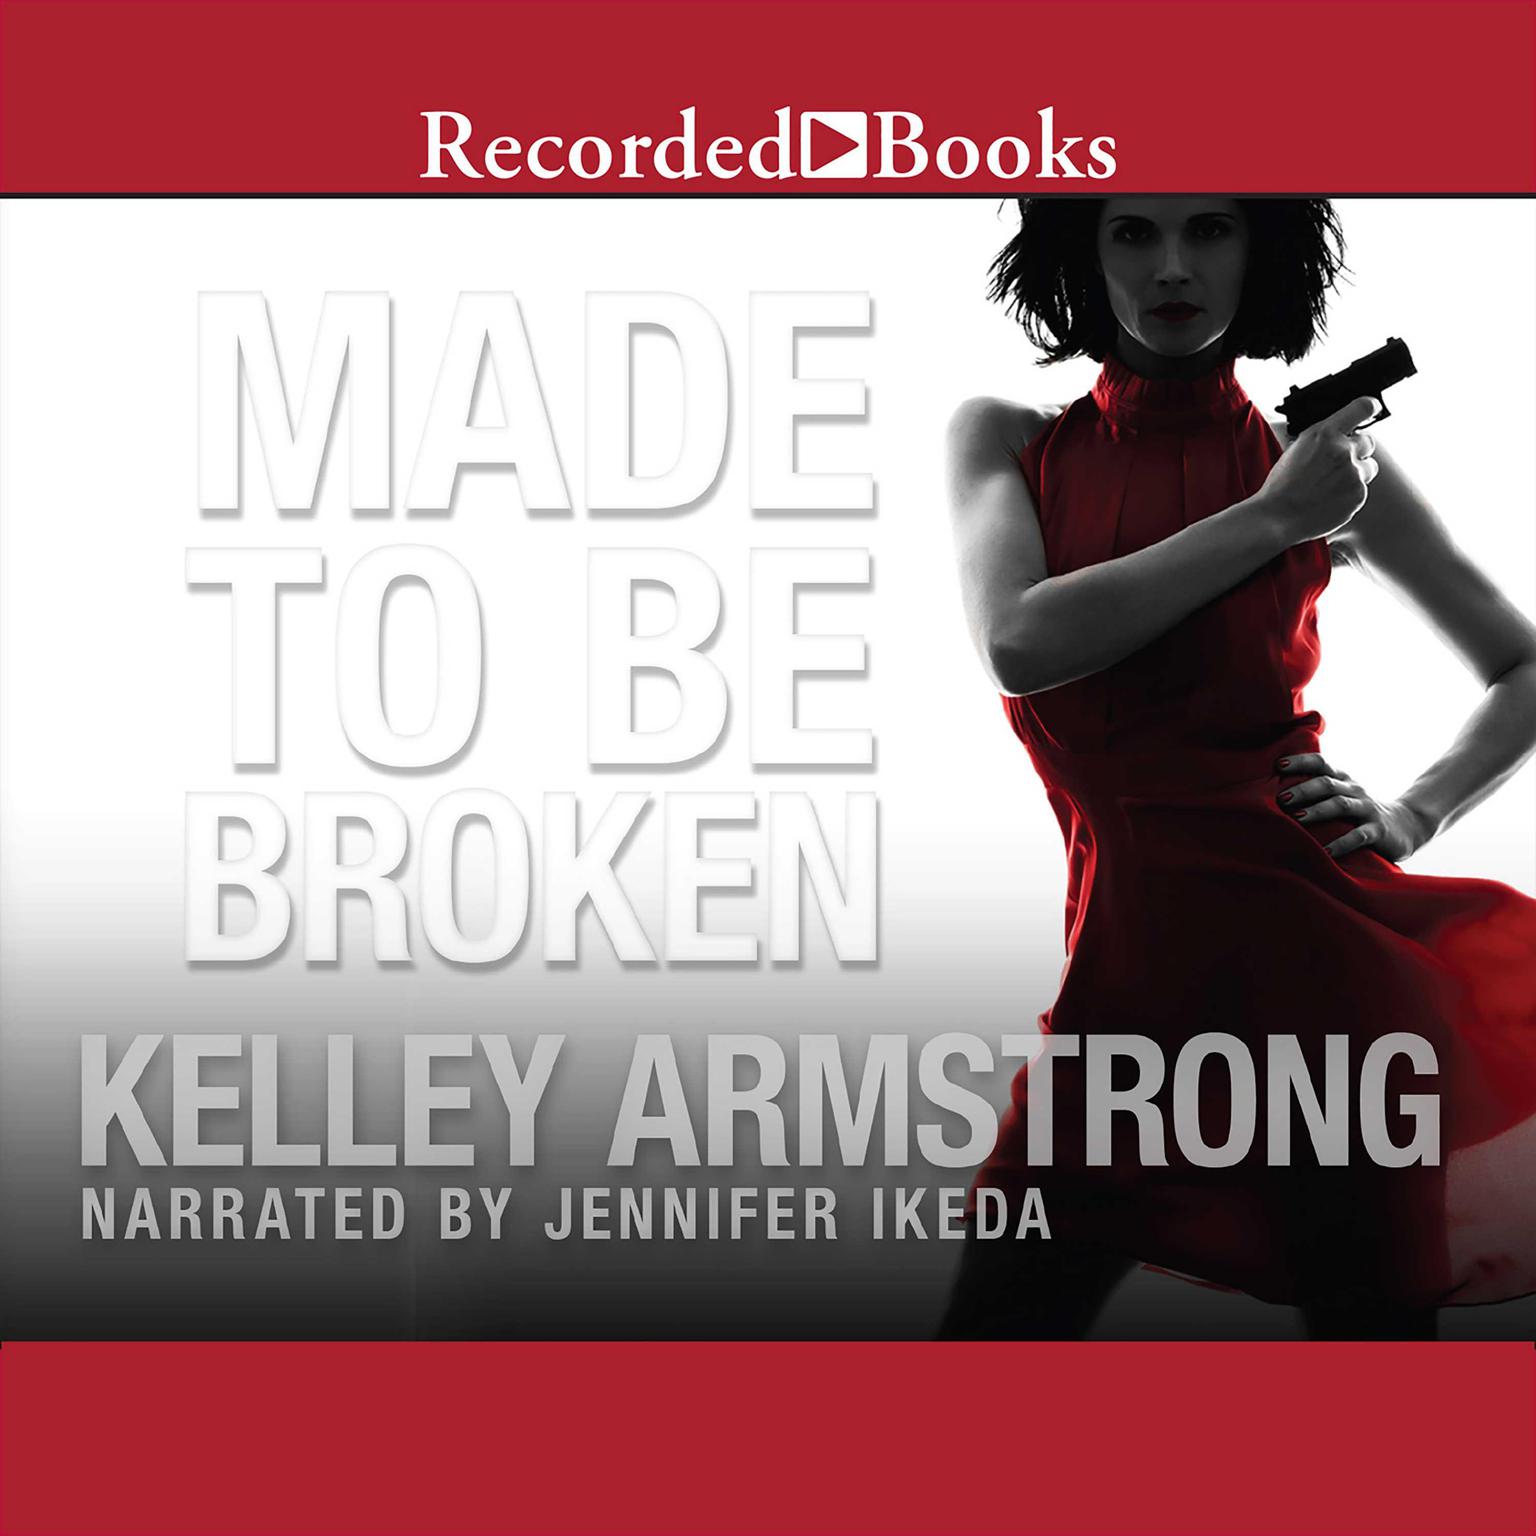 Made to Be Broken Audiobook, by Kelley Armstrong